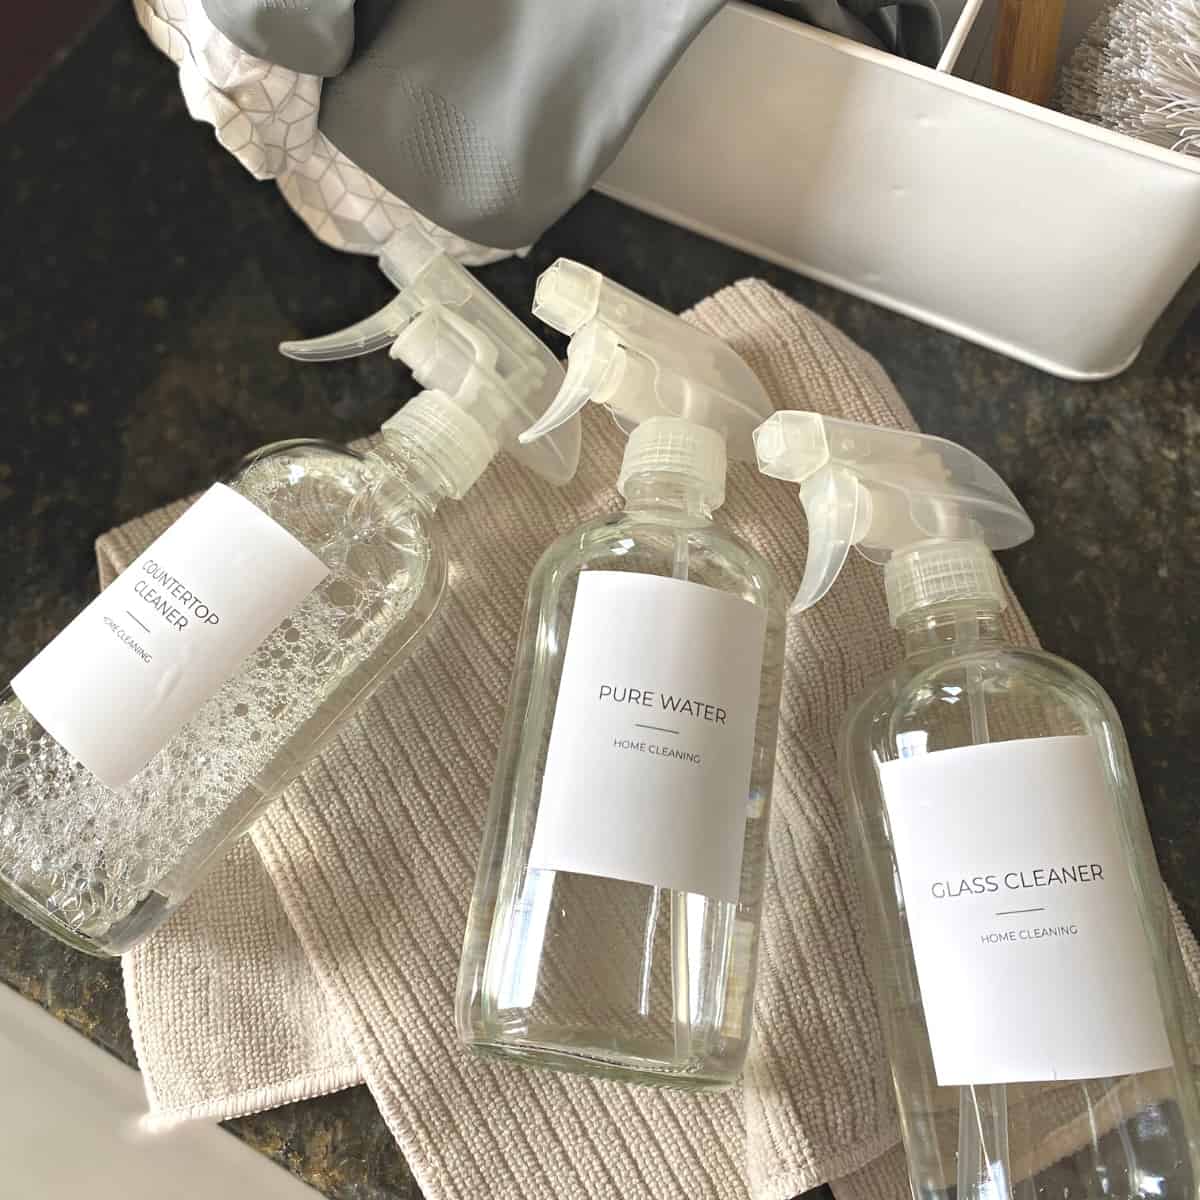 Bathroom cleaning products in glass spray bottles from above on cleaning towel